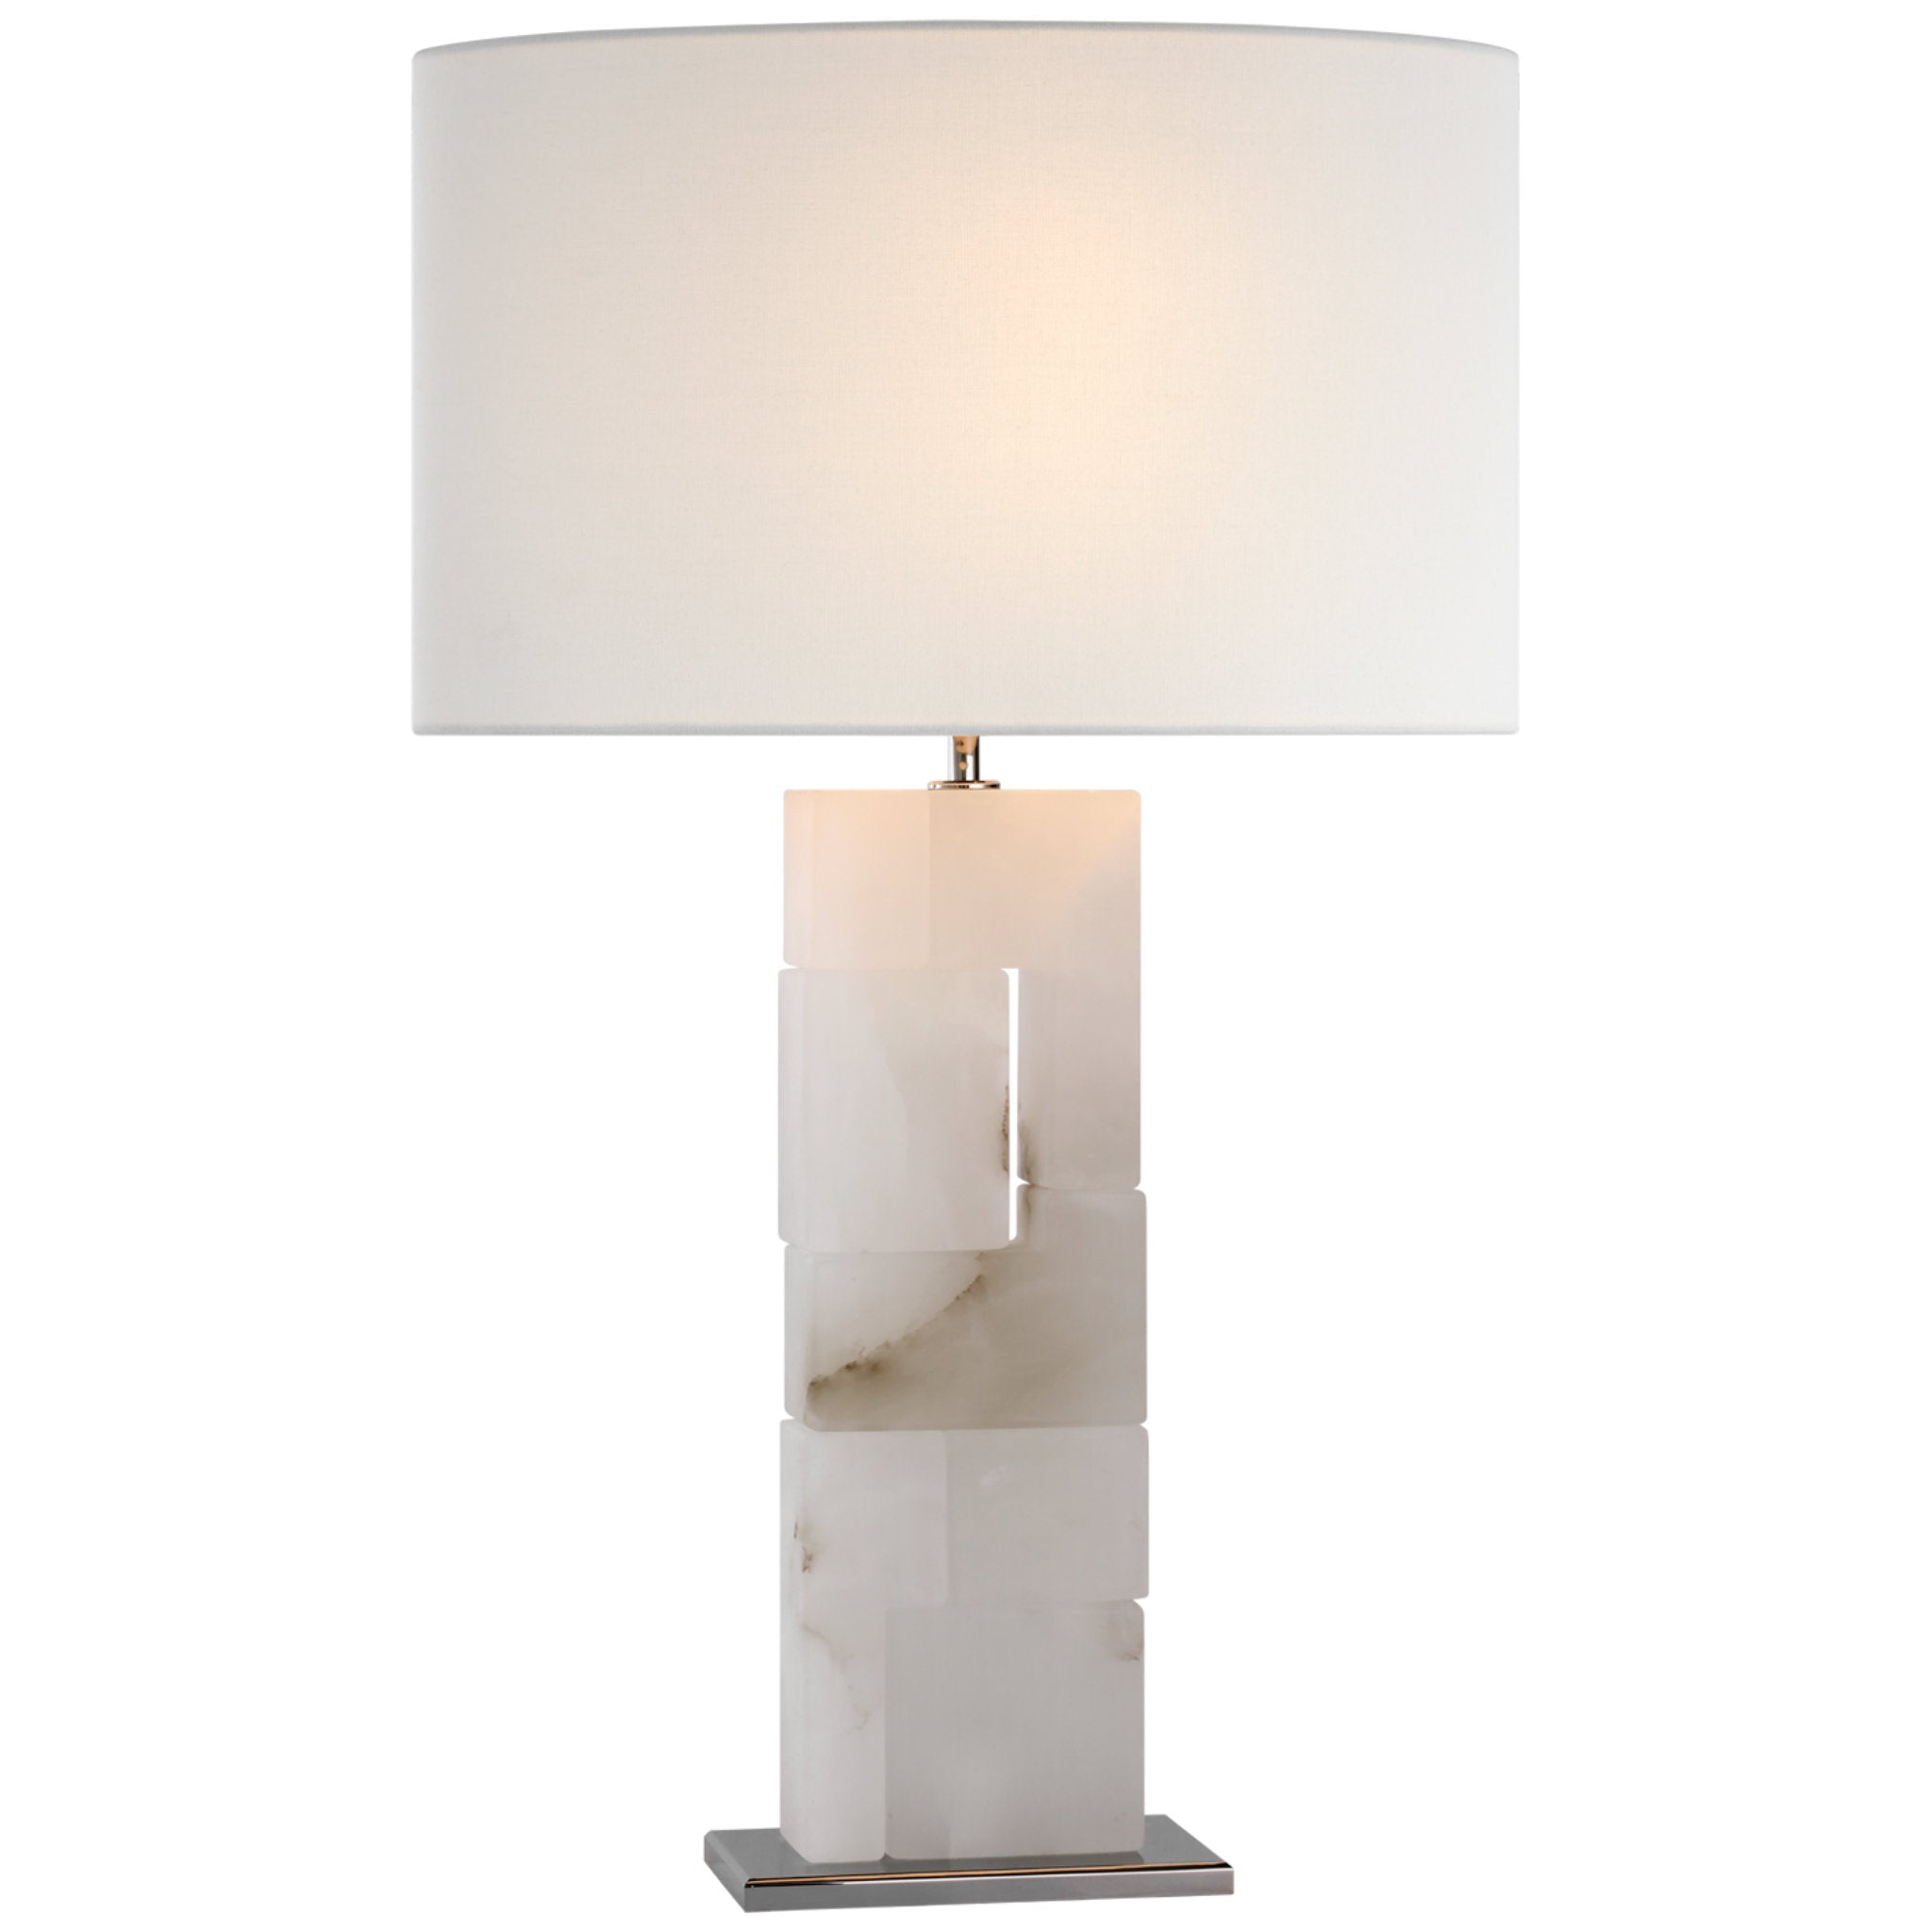 Ian K. Fowler Ashlar Large Table Lamp in Alabaster and Polished Nickel with Linen Shade